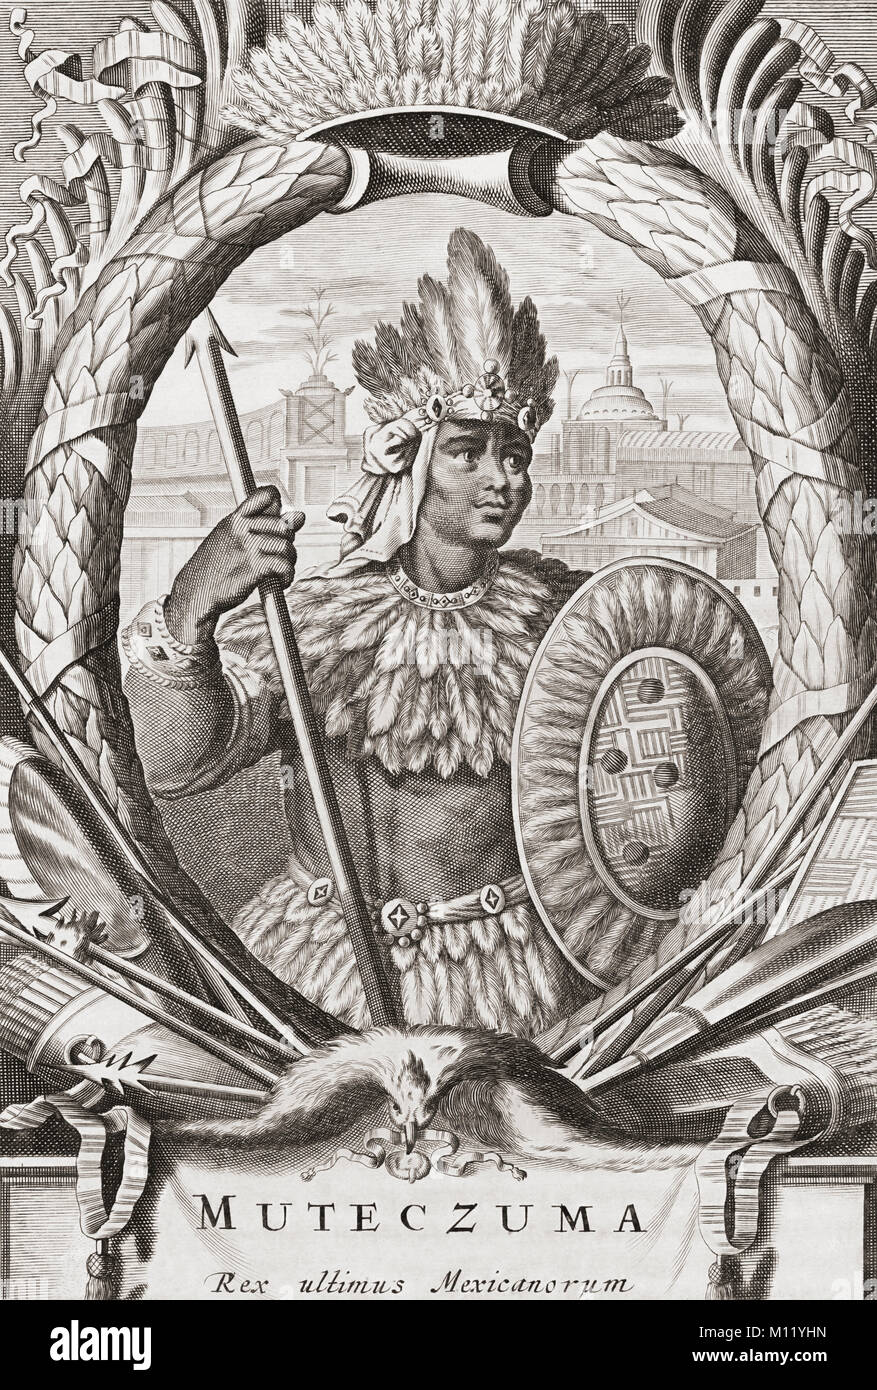 Moctezuma II, c. 1466-1520. Ninth ruler of city-state of Tenochtitlan (now part of modern Mexico). It was during his reign that Mesoamericans and Europeans first came into contact. Stock Photo